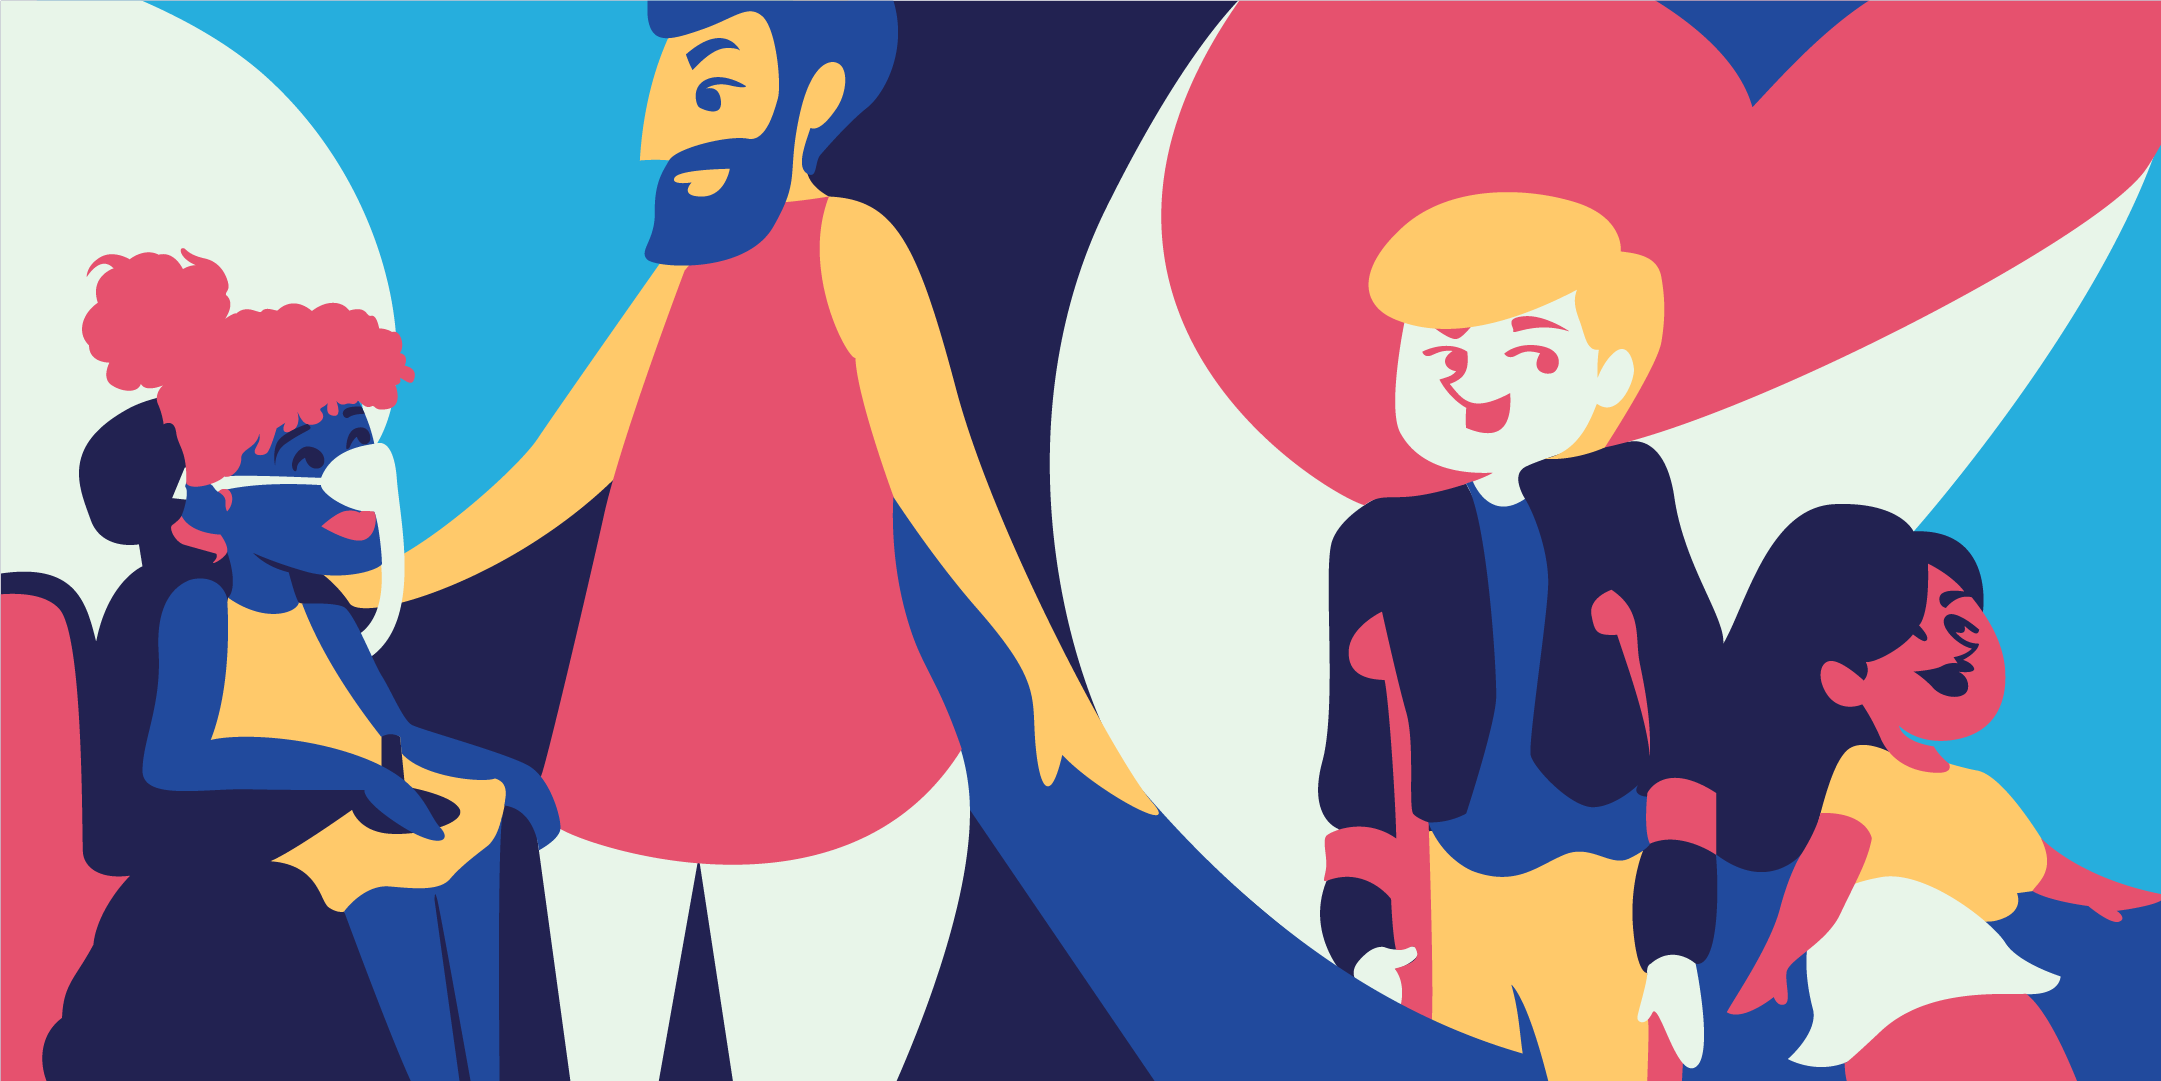 A colourful illustration of people with disabilities.